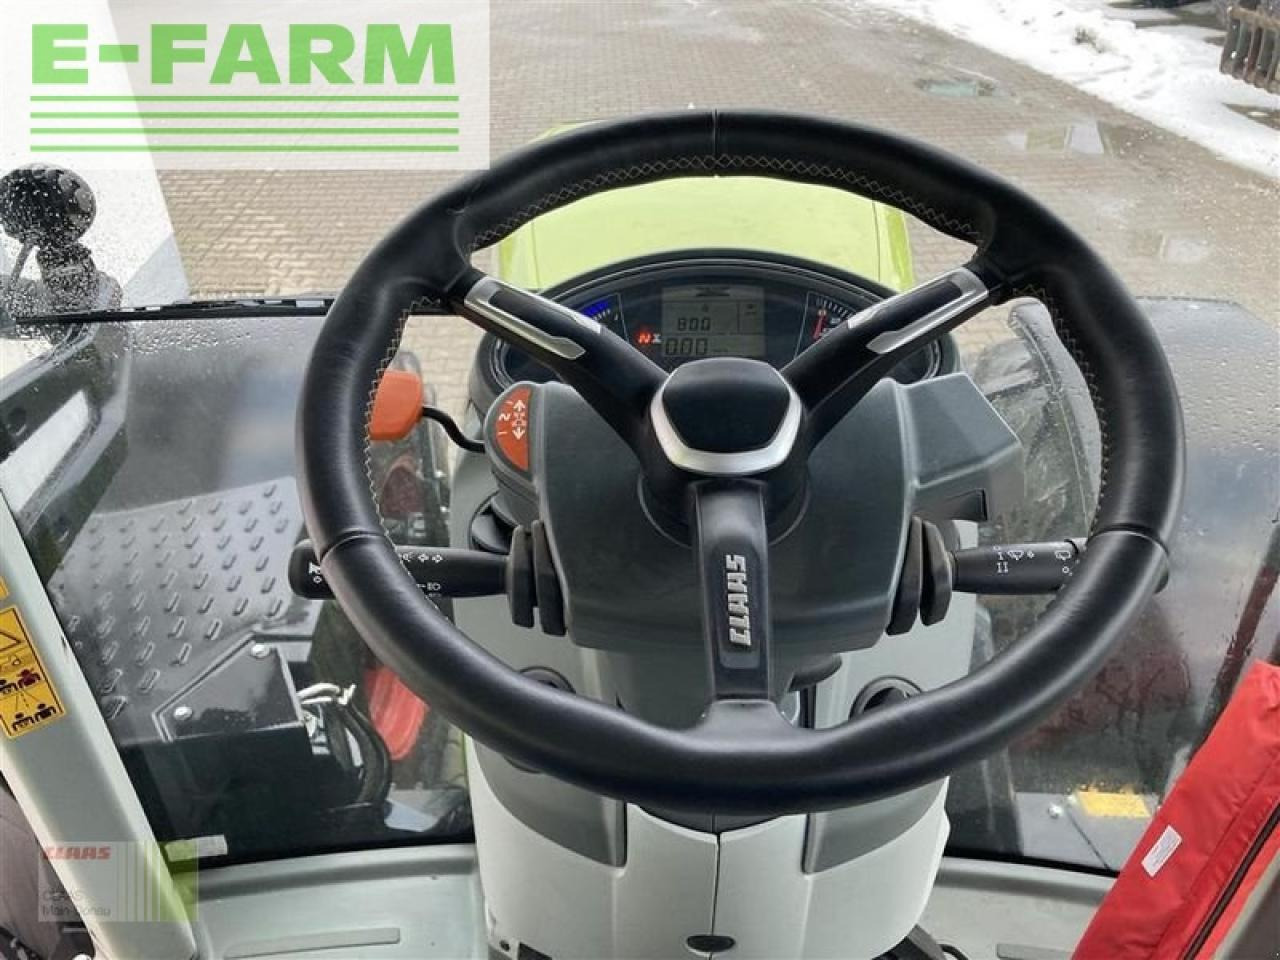 Tracteur agricole CLAAS arion 660 cmatic - st v first